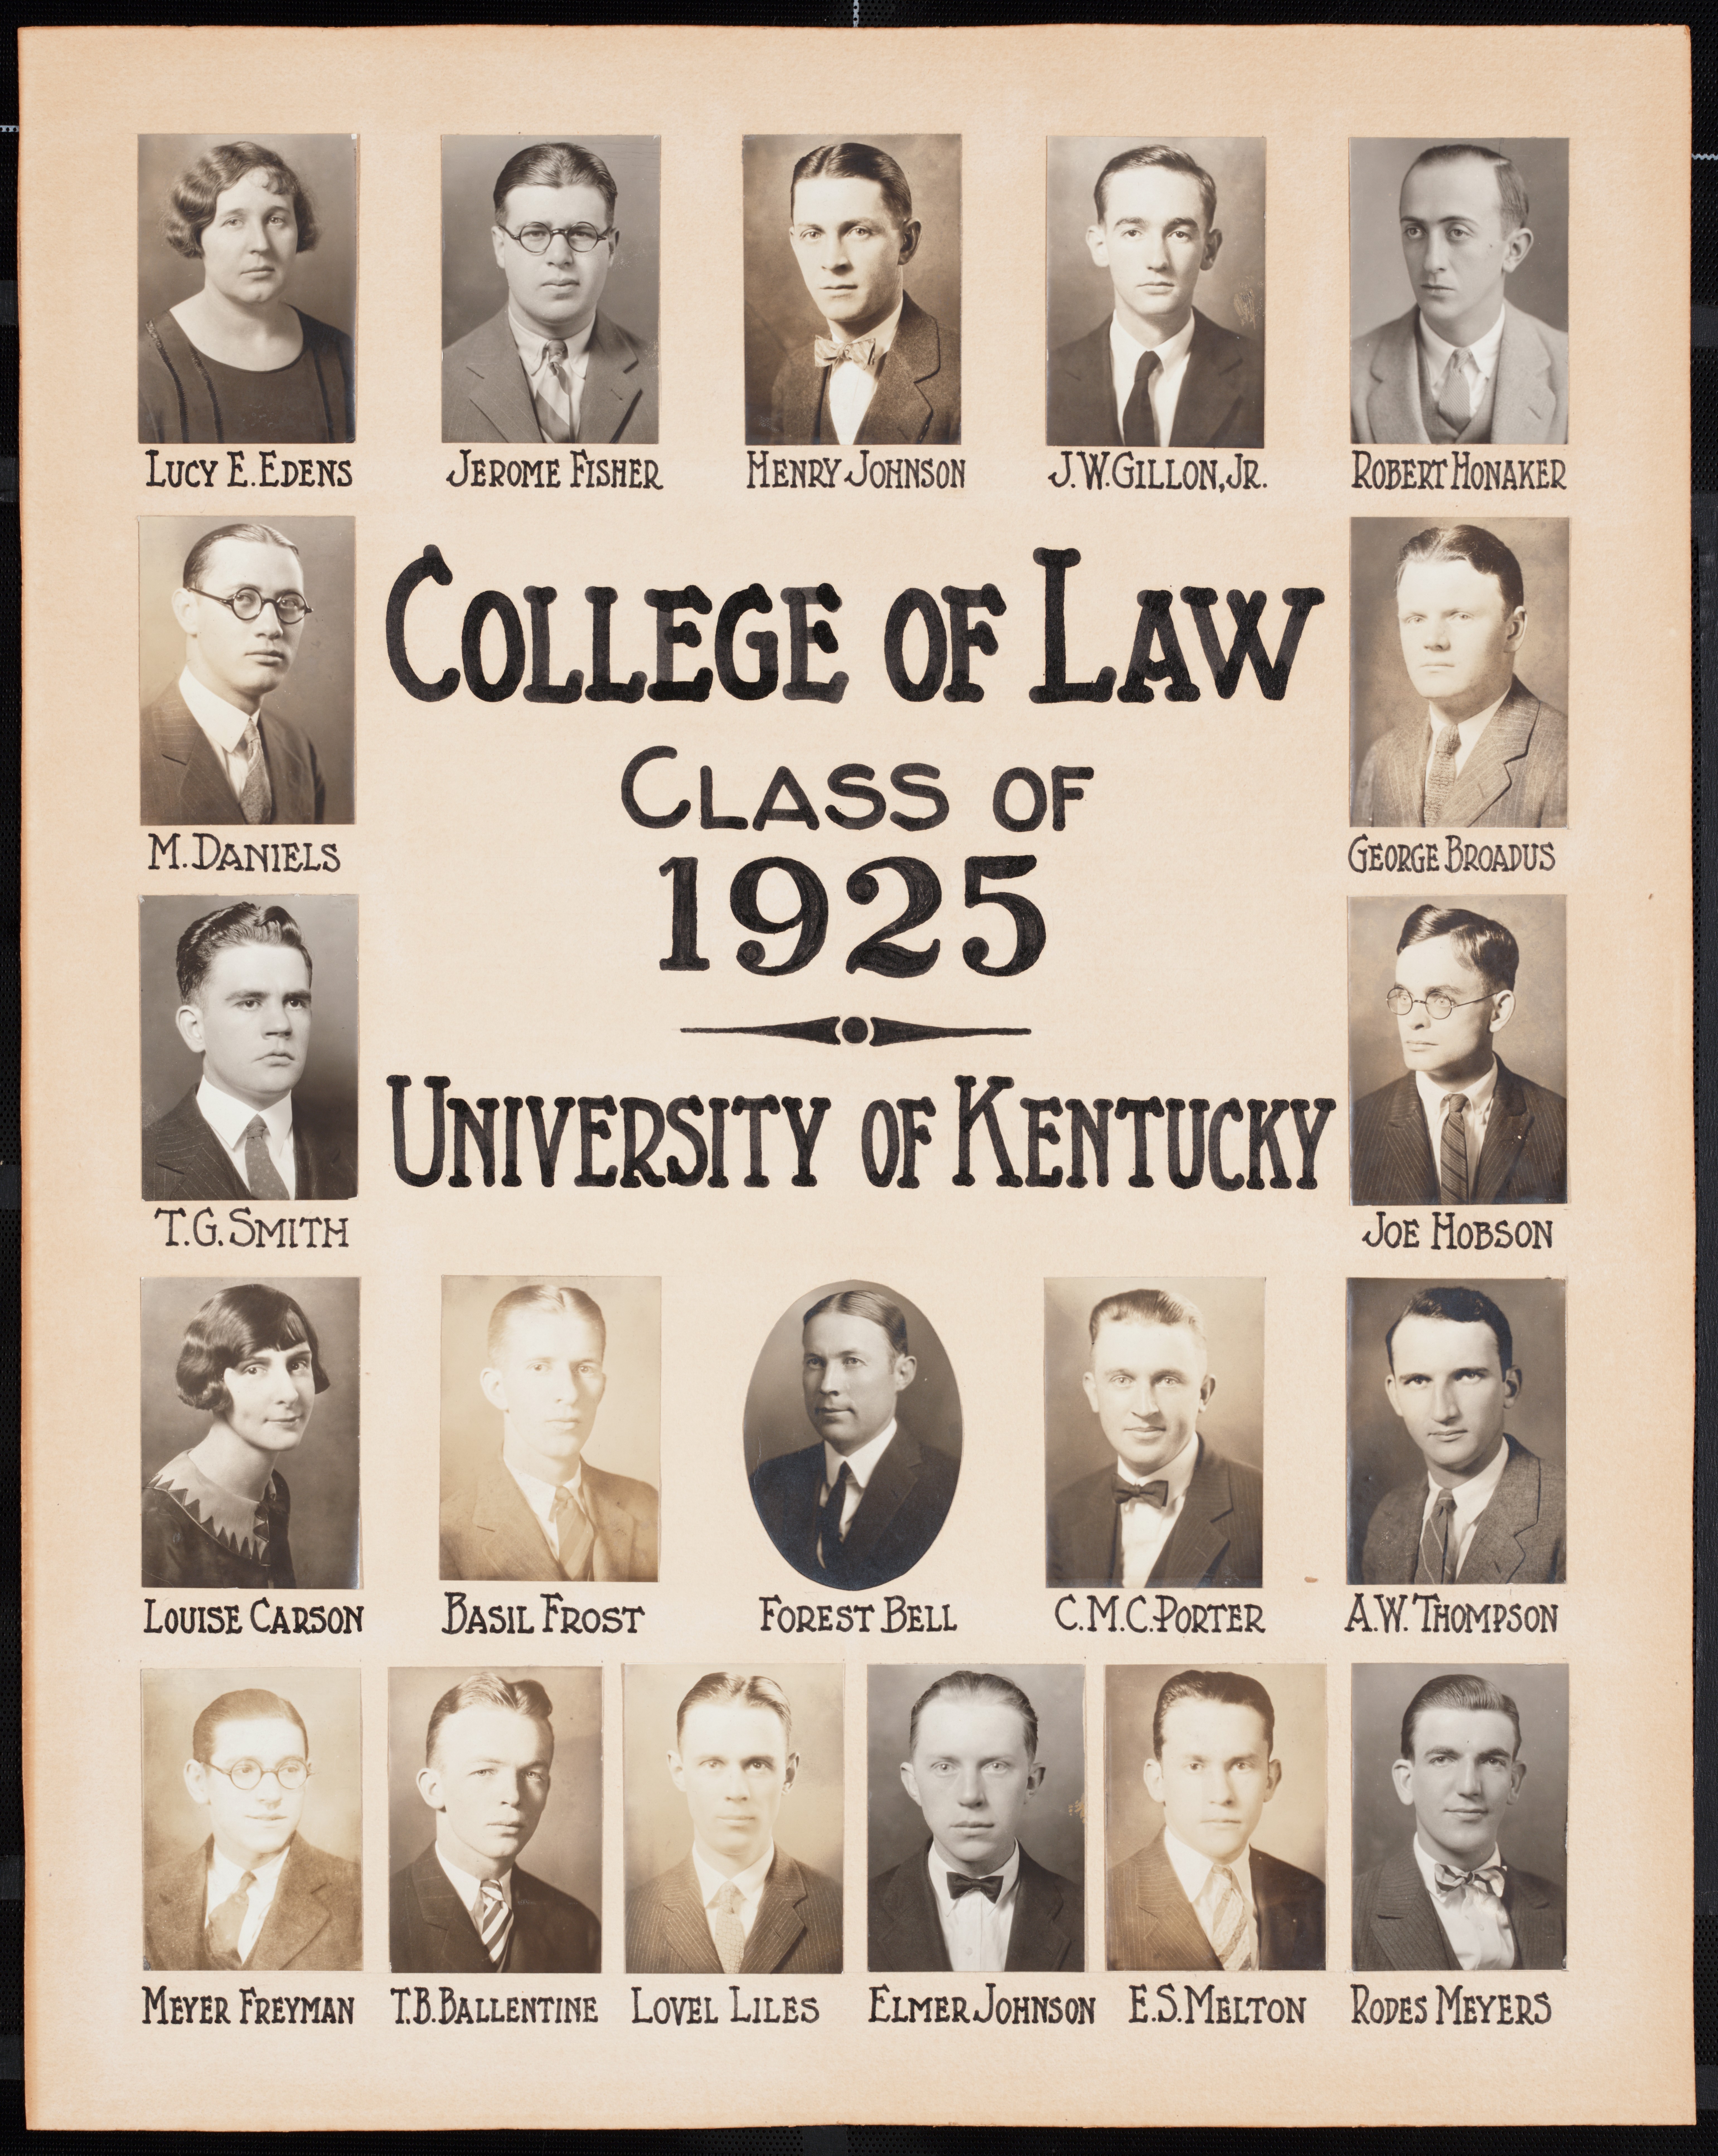 College of Law Class of 1925